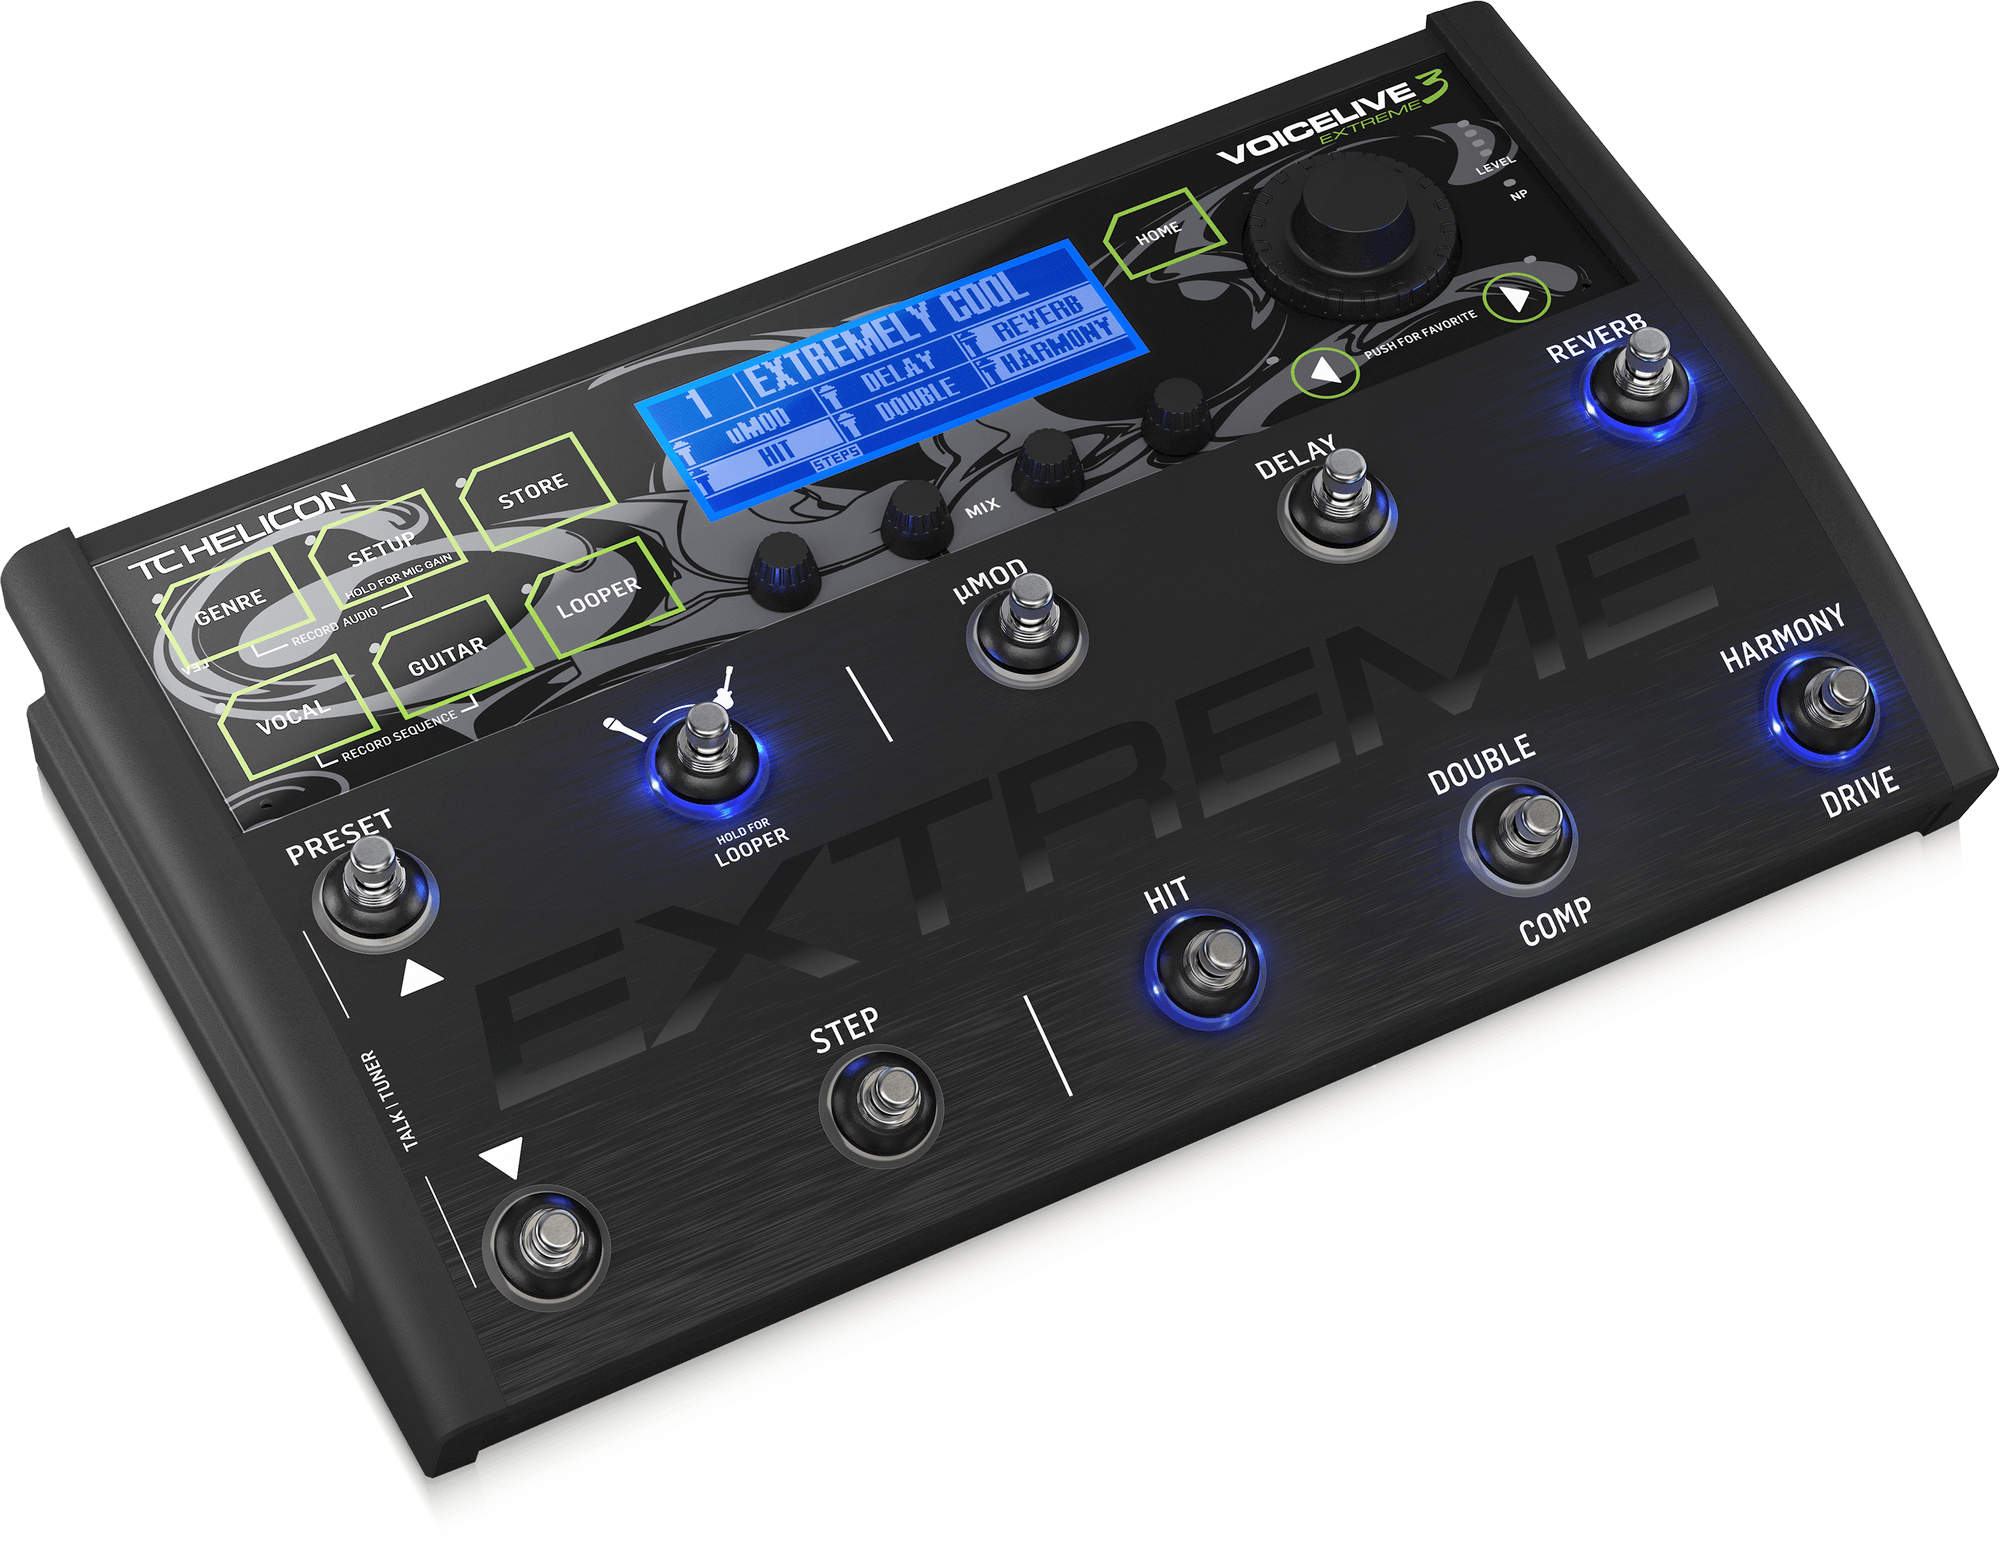 TC Helicon | Product | VOICELIVE 3 EXTREME